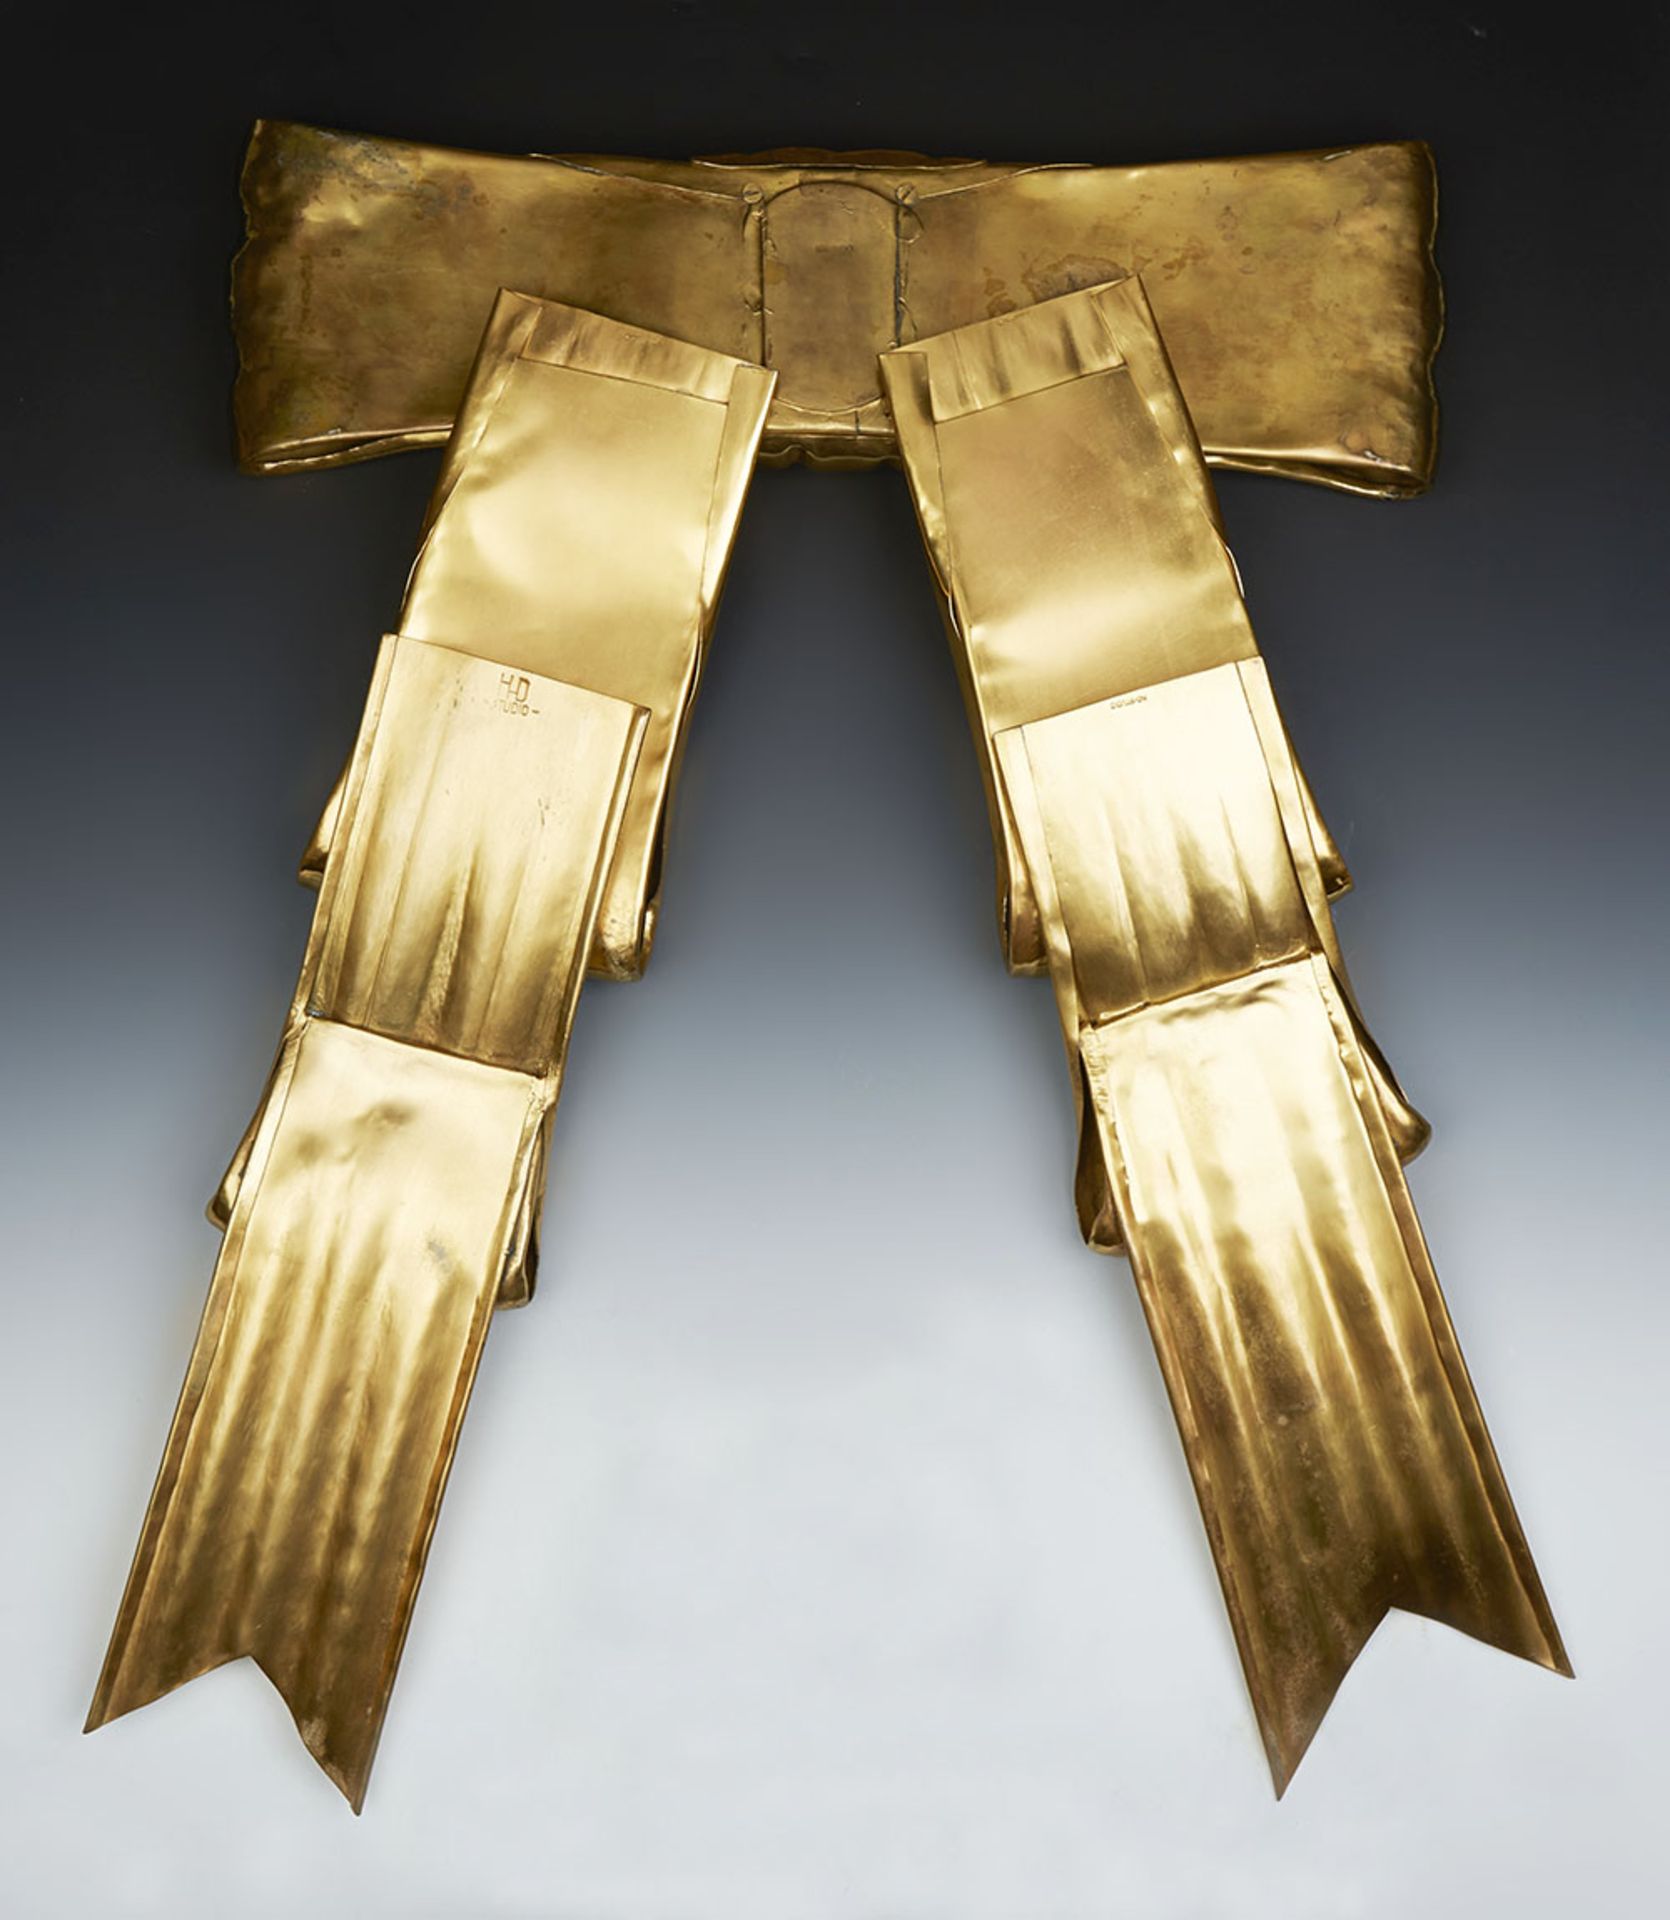 DULANY STUDIO GILT METAL BOW BY HELEN HUGHES EARLY 20TH C. - Image 3 of 11